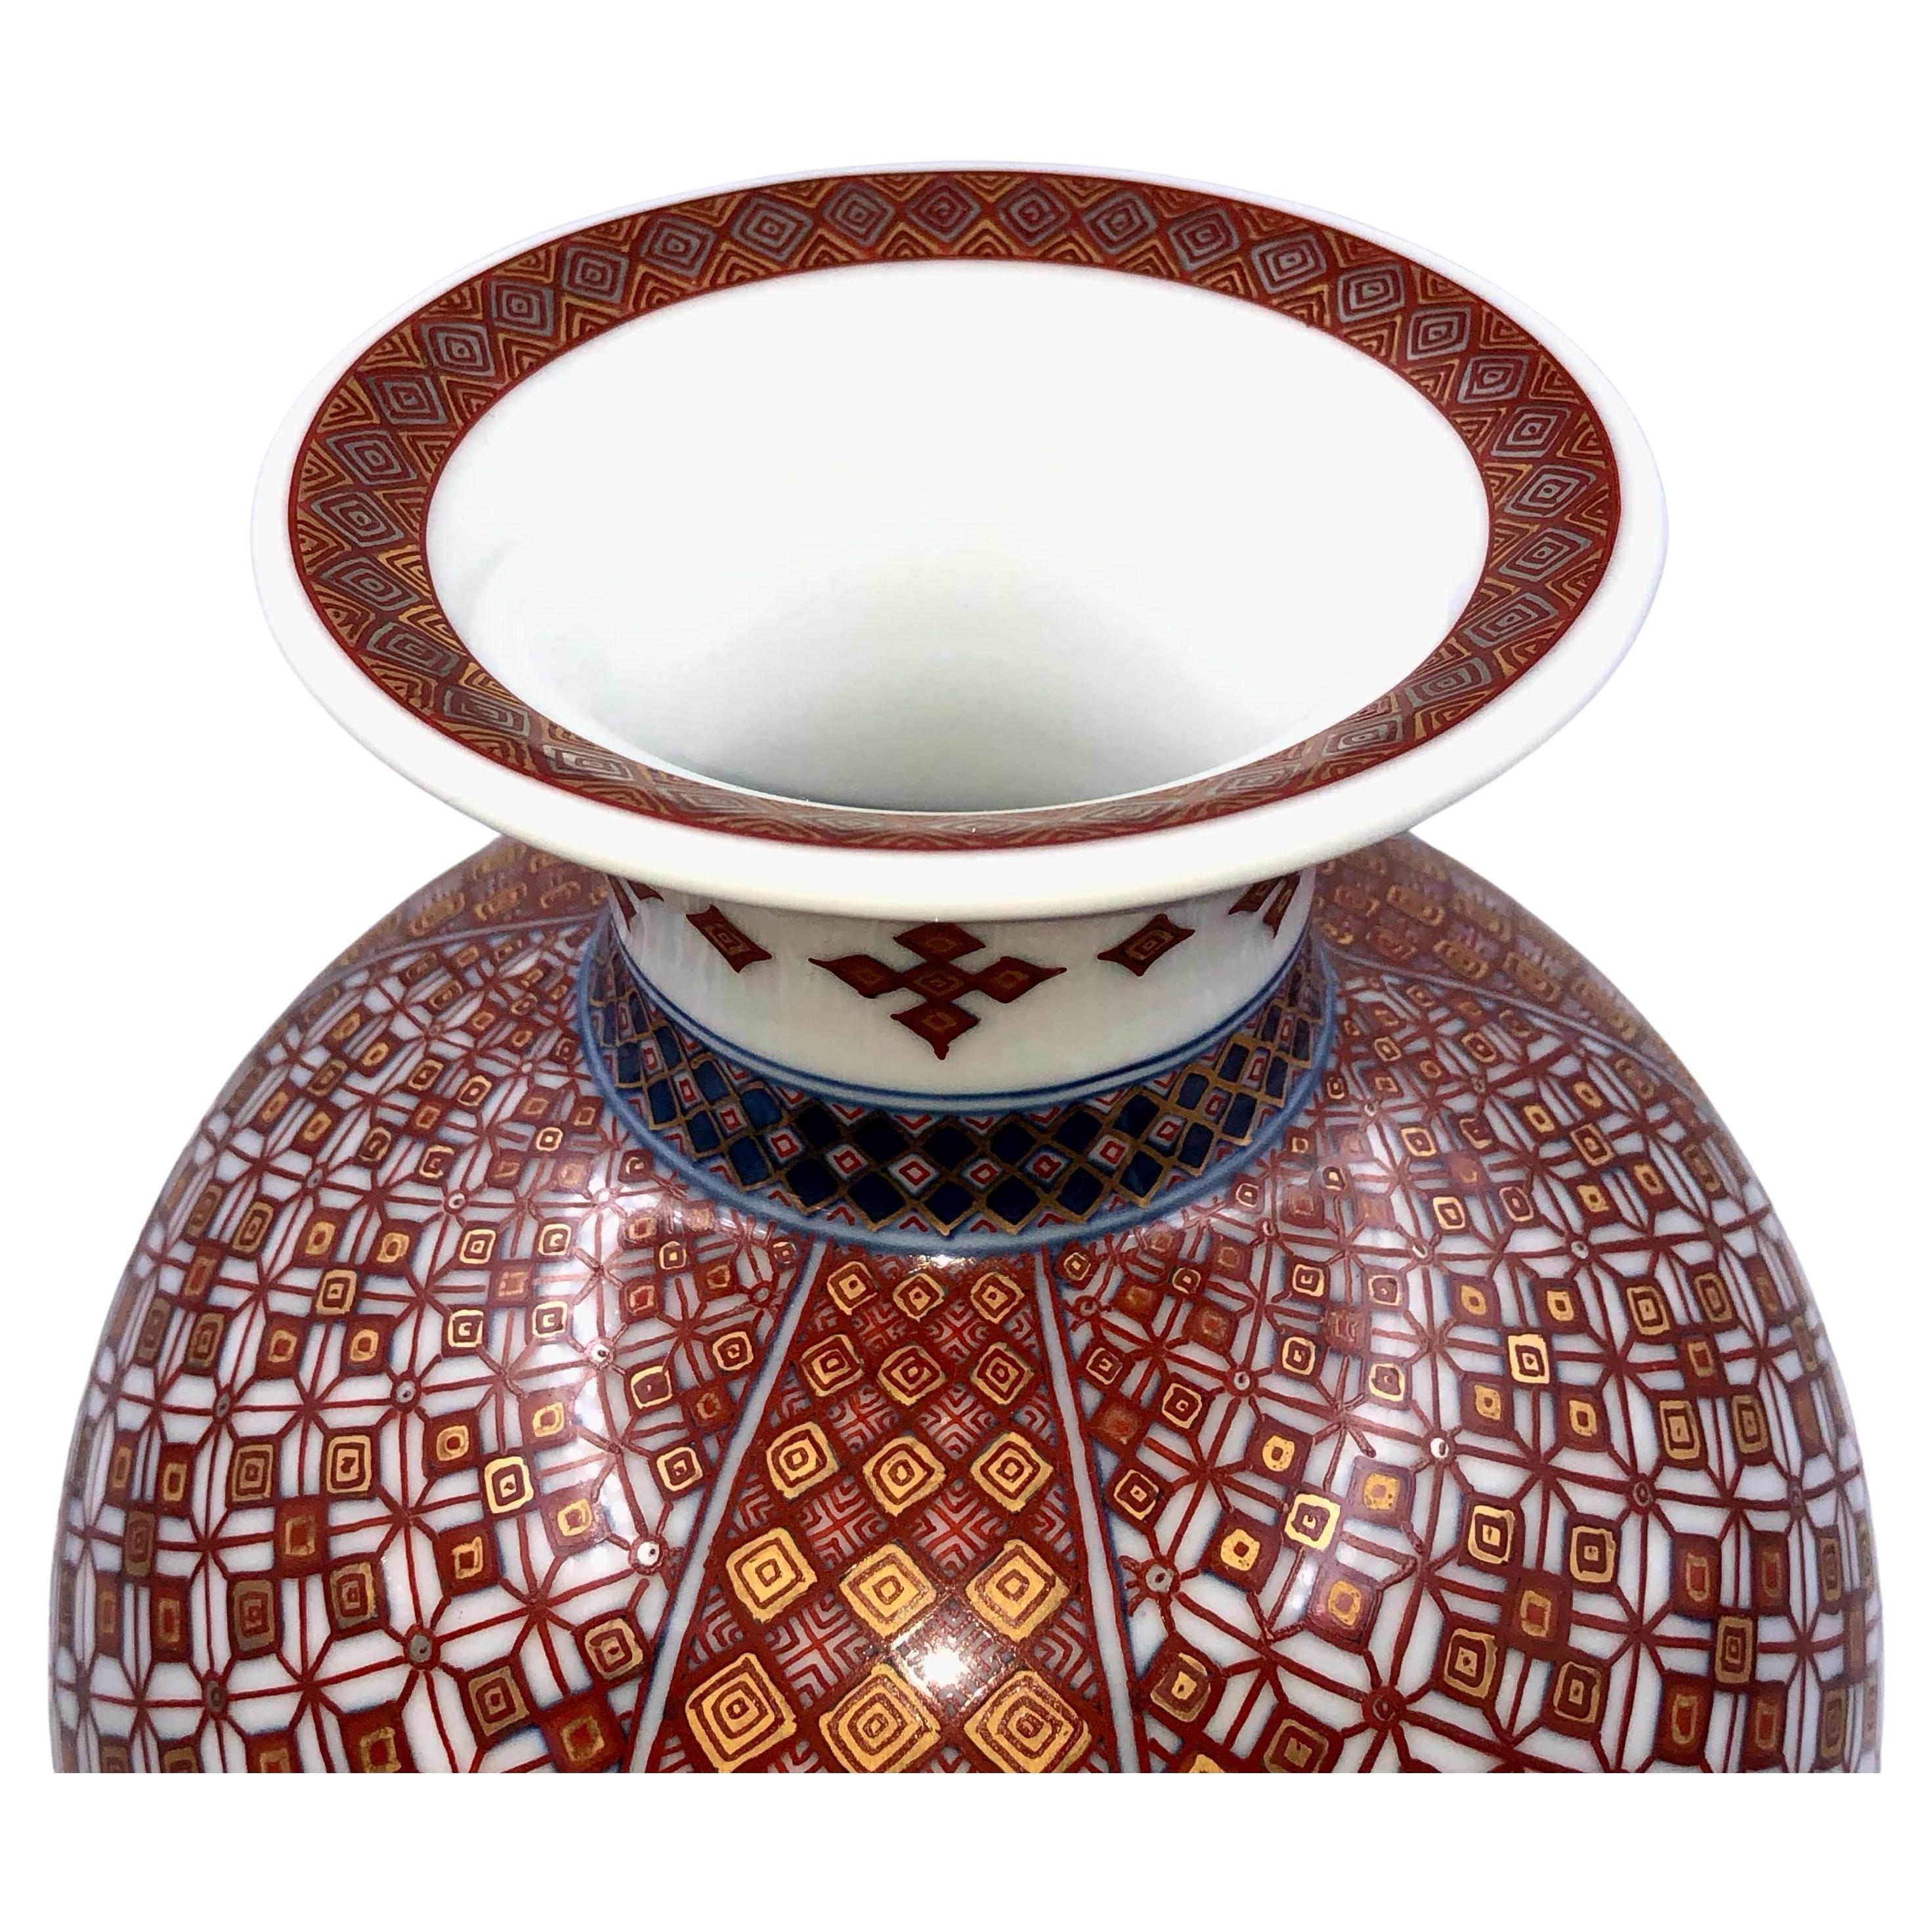 Exquisite Japanese museum quality contemporary decorative porcelain vase in an extraordinary shape featuring two fascinating and detailed geometric progression patterns extremely intricately hand painted in red and blue with generous gold details, a